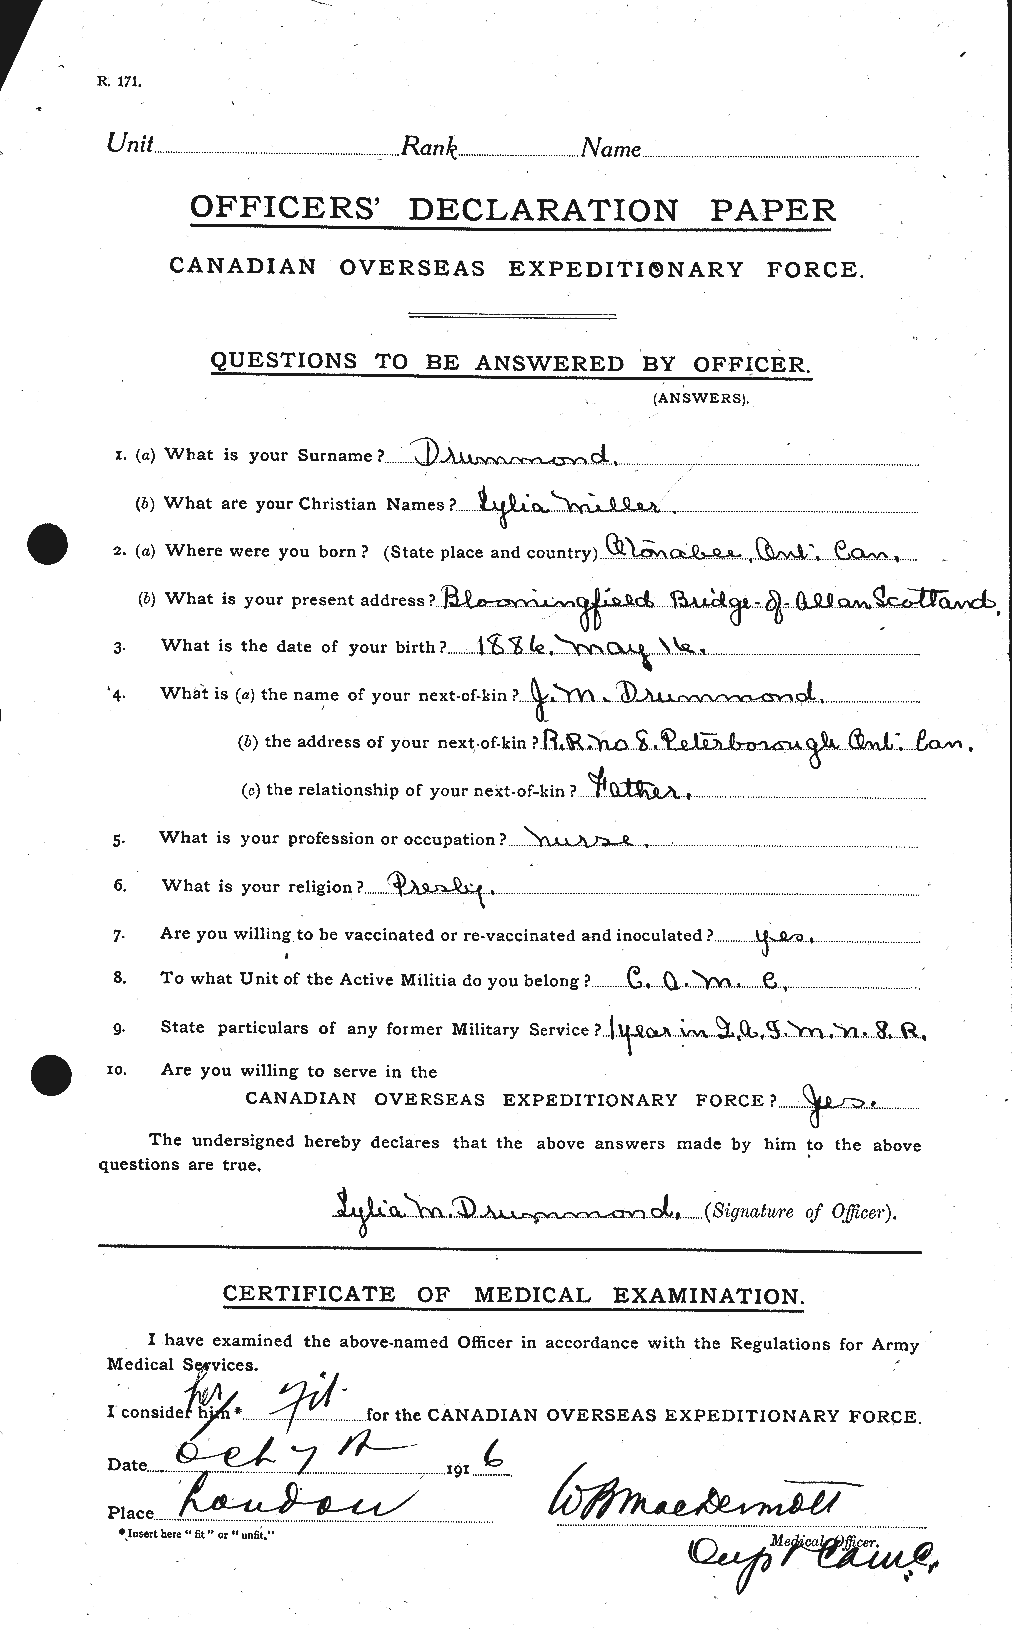 Personnel Records of the First World War - CEF 300926a